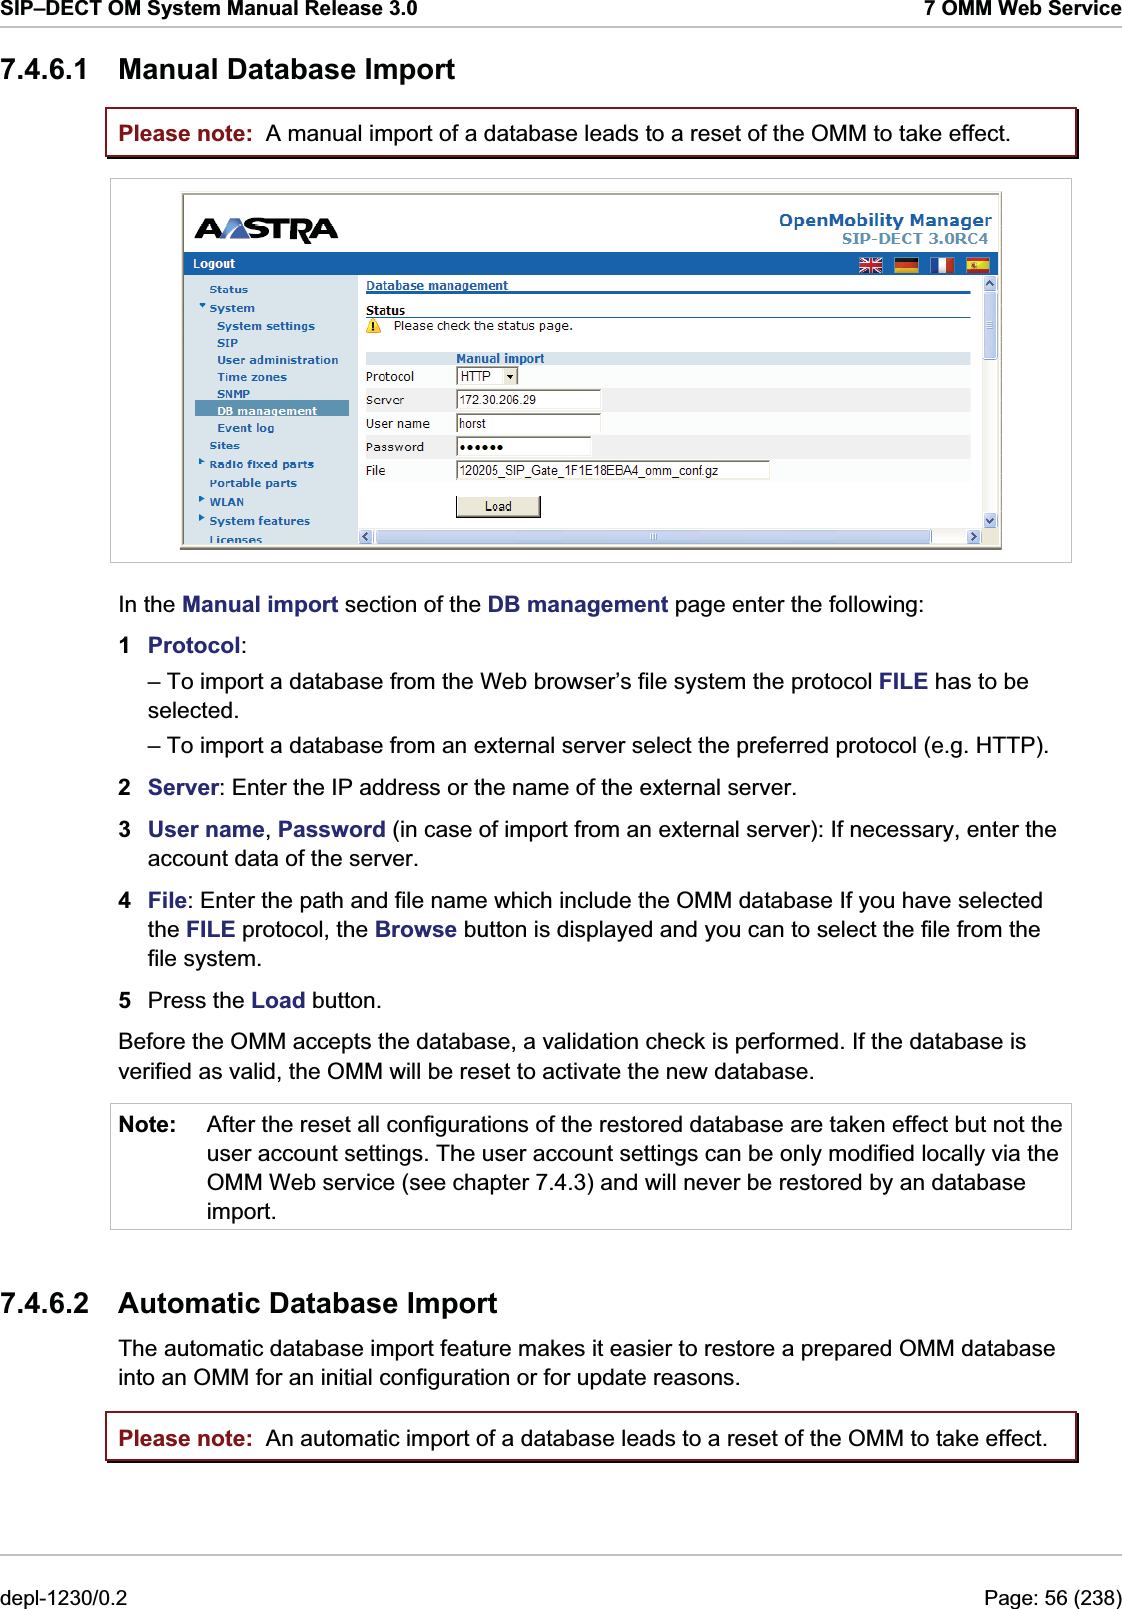 SIP–DECT OM System Manual Release 3.0  7 OMM Web Service 7.4.6.1 Manual Database Import Please note: Please note: A manual import of a database leads to a reset of the OMM to take effect.  In the Manual import section of the DB management page enter the following:  1  Protocol:  – To import a database from the Web browser’s file system the protocol FILE has to be selected. – To import a database from an external server select the preferred protocol (e.g. HTTP). 2  Server: Enter the IP address or the name of the external server. 3  User name, Password (in case of import from an external server): If necessary, enter the account data of the server. 4  File: Enter the path and file name which include the OMM database If you have selected the FILE protocol, the Browse button is displayed and you can to select the file from the file system. 5  Press the Load button.  Before the OMM accepts the database, a validation check is performed. If the database is verified as valid, the OMM will be reset to activate the new database. Note:  After the reset all configurations of the restored database are taken effect but not the user account settings. The user account settings can be only modified locally via the OMM Web service (see chapter 7.4.3) and will never be restored by an database import.  7.4.6.2  Automatic Database Import The automatic database import feature makes it easier to restore a prepared OMM database into an OMM for an initial configuration or for update reasons. An automatic import of a database leads to a reset of the OMM to take effect. depl-1230/0.2  Page: 56 (238) 